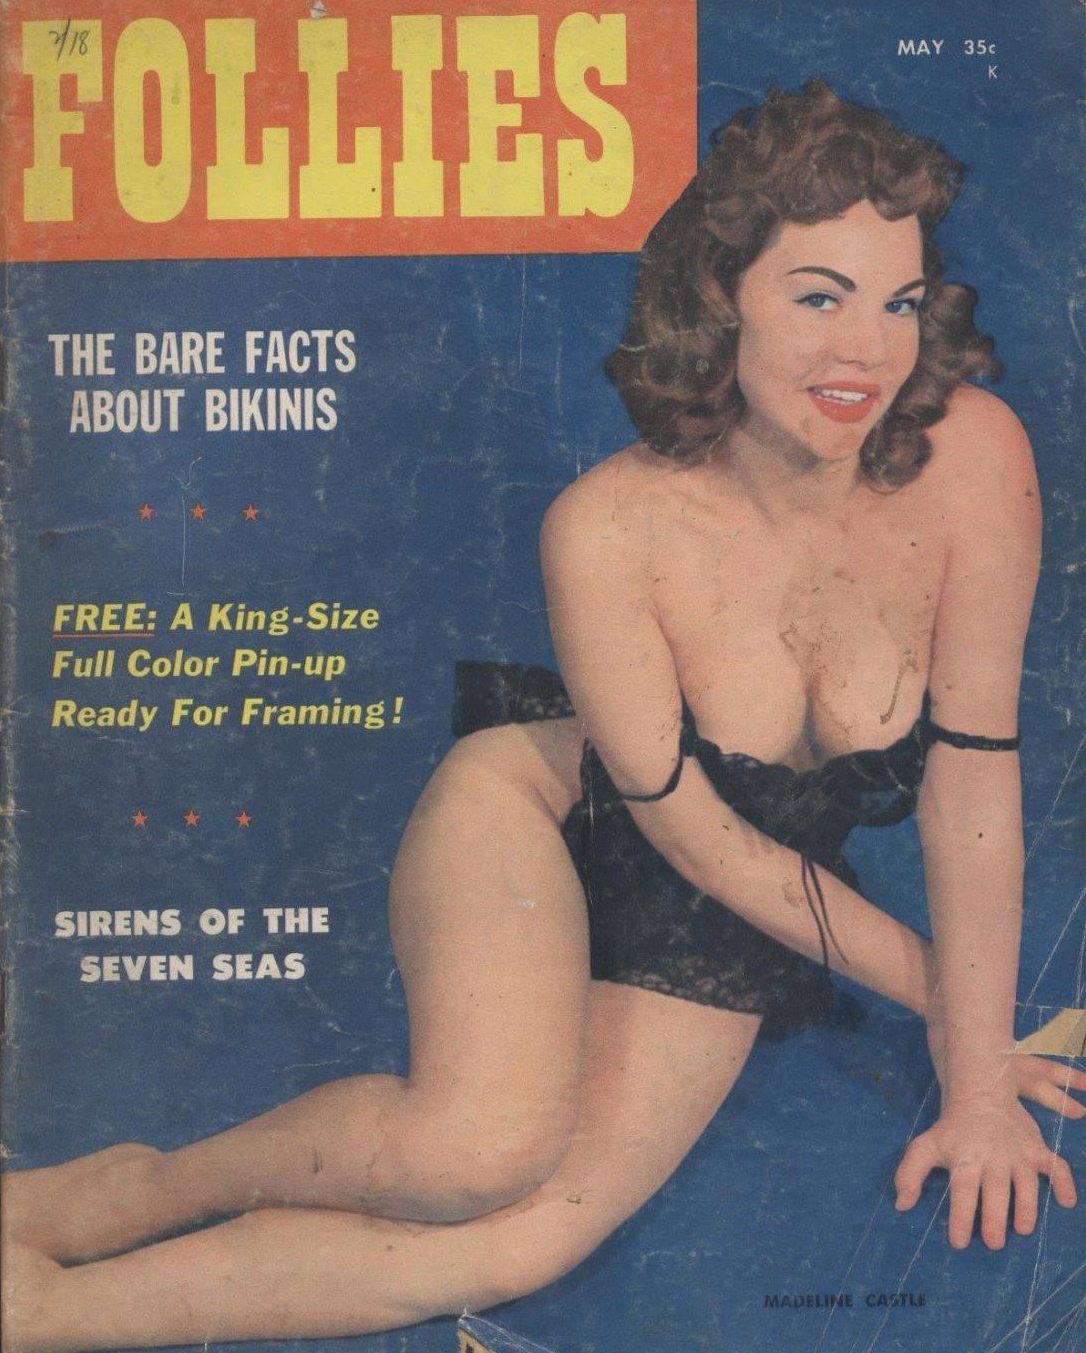 Follies May 1958 magazine back issue Follies magizine back copy Follies May 1958 Vintage Pin-Up Girls Adult Magazine Back Issue Beautiful Ornamental Naked Women. The Bare Facts About Bikinis.